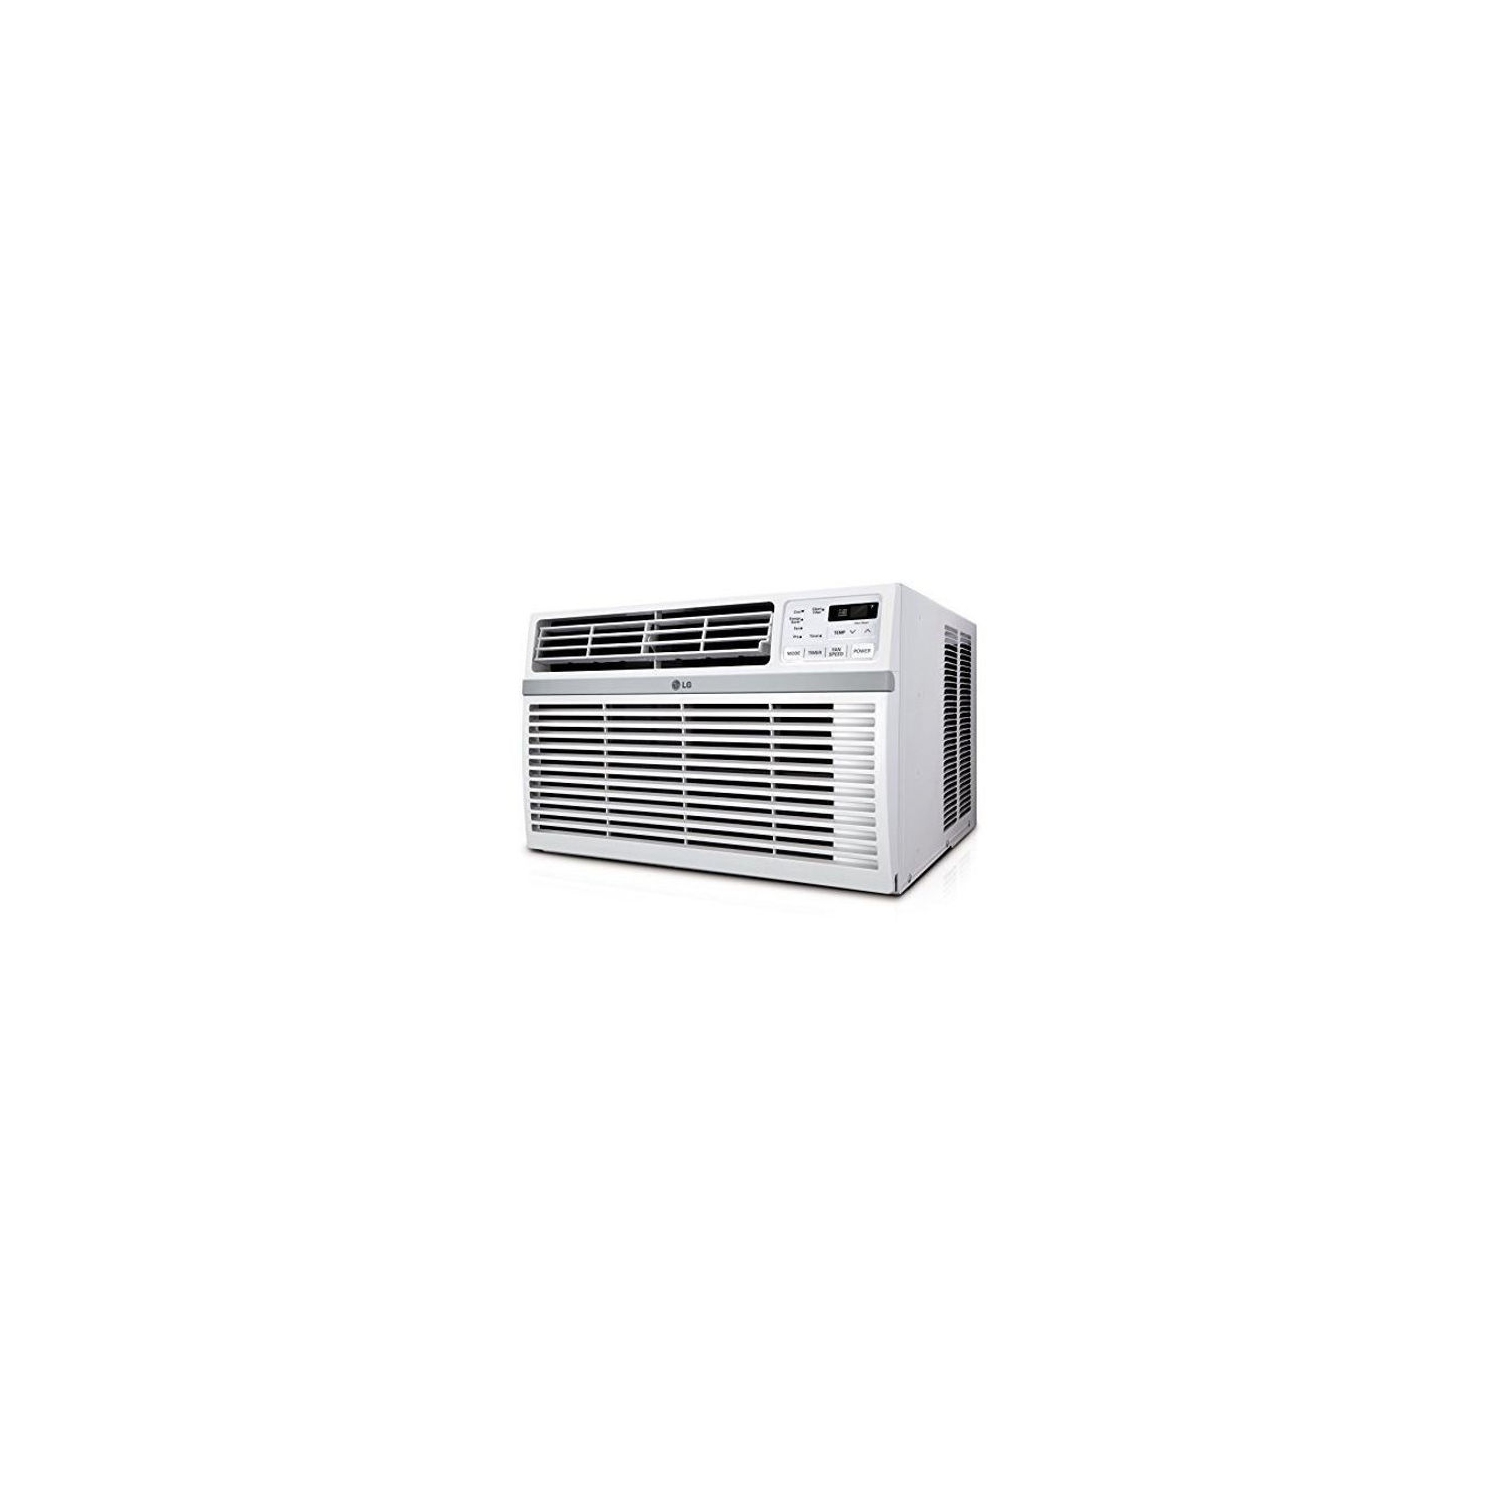 Lg 12,000 Btu Window Air Conditioner With Remote LW1216E - Certified Refurbished